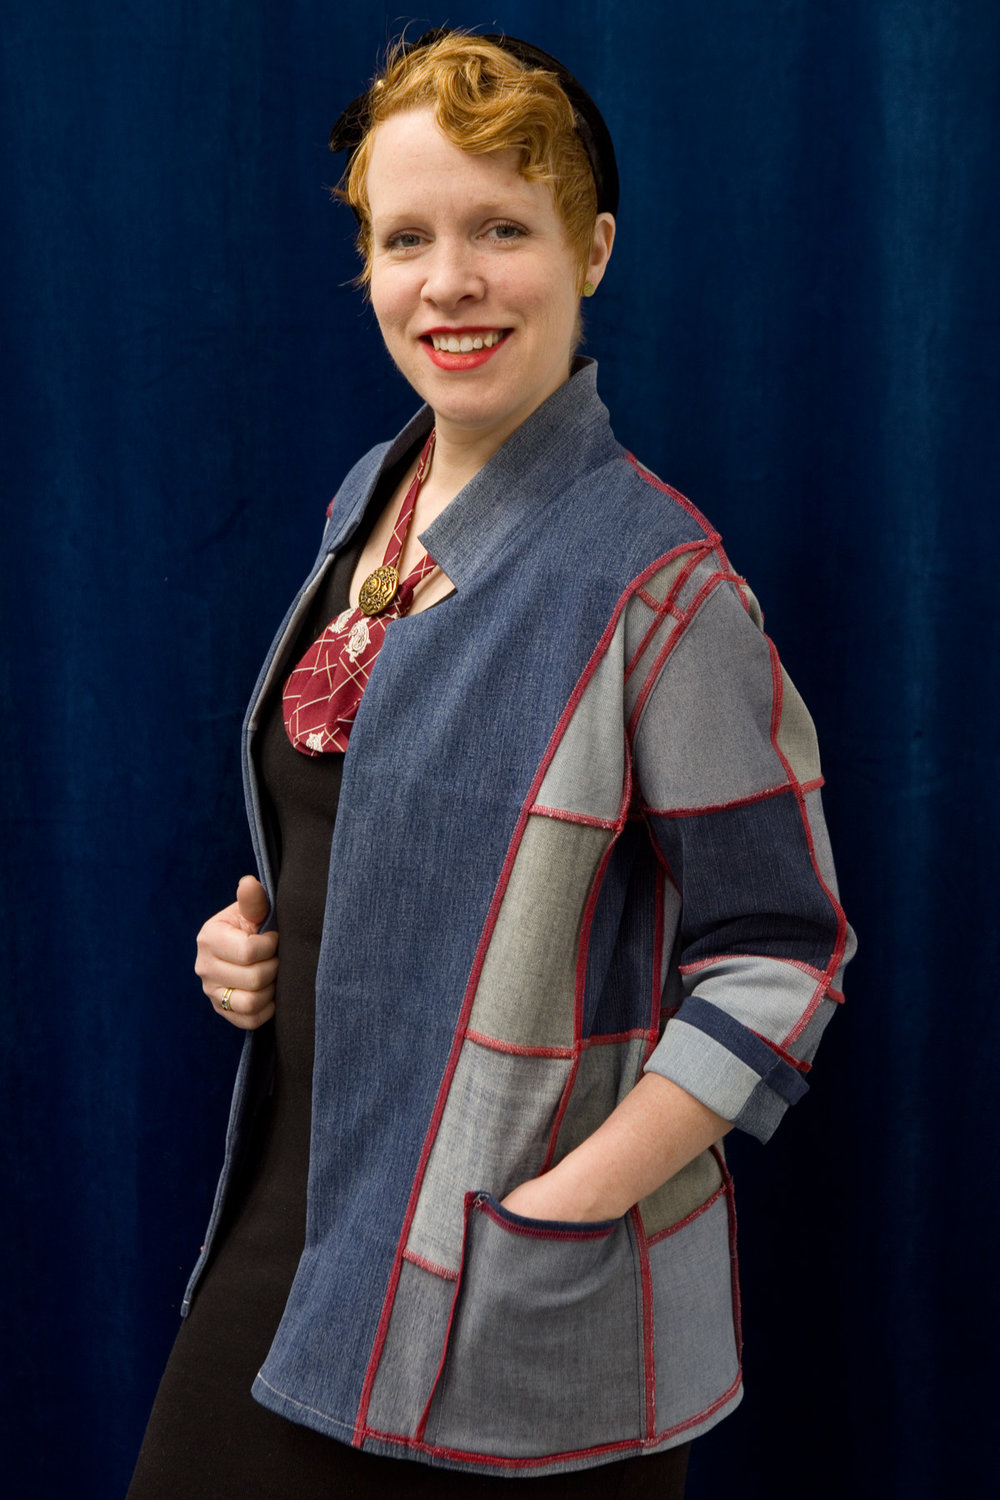 RETHINK owner Kristen McCoy in an upcycled denim blazer. She explained, “To upcycle is to add value to something in the processing. We’re able to take a worn garment and turn it into something new. We take jeans that are no longer wearable and cut them into denim squares. The result is a reversible blazer that still has a lot of wear. It’s on sale at the shop, and is size fluid (small to large). (Photo by Margie O’Loughlin)